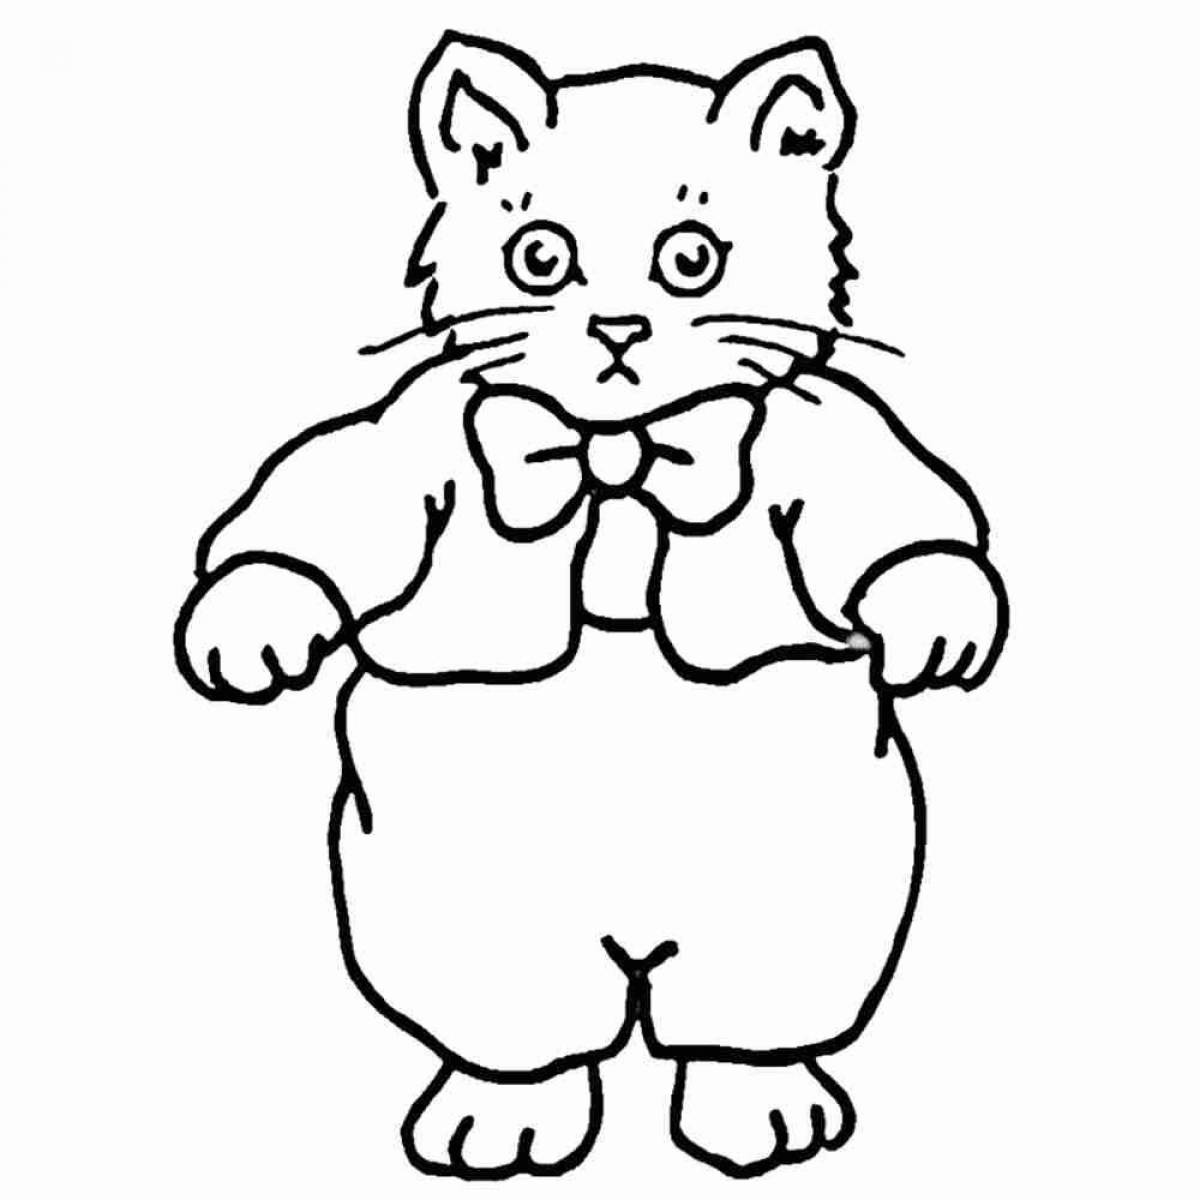 Coloring book stylish kitten with clothes